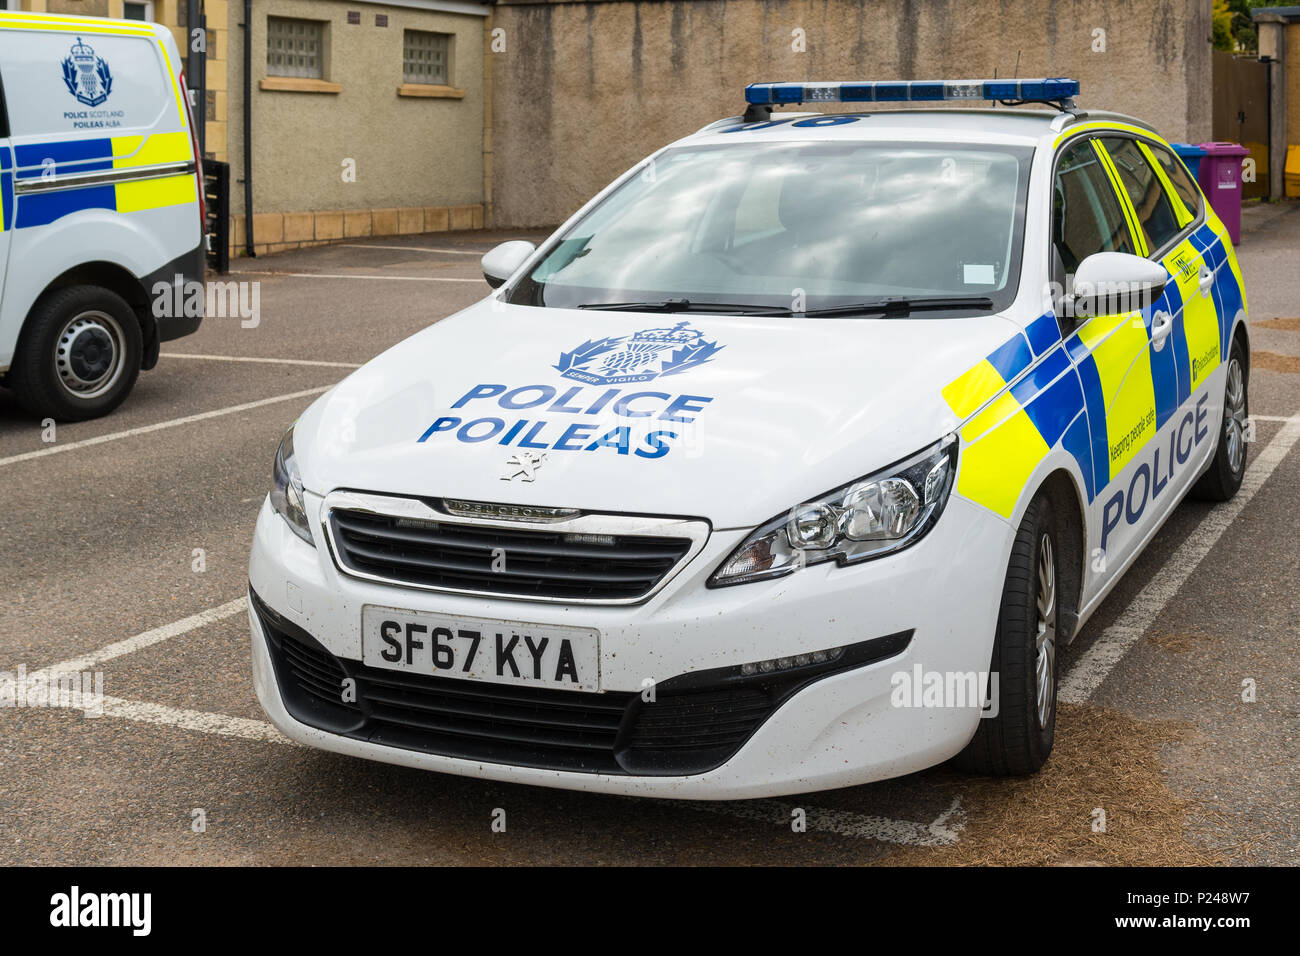 Police Scotland police car and log with name in Gaelic - Poileas Stock Photo